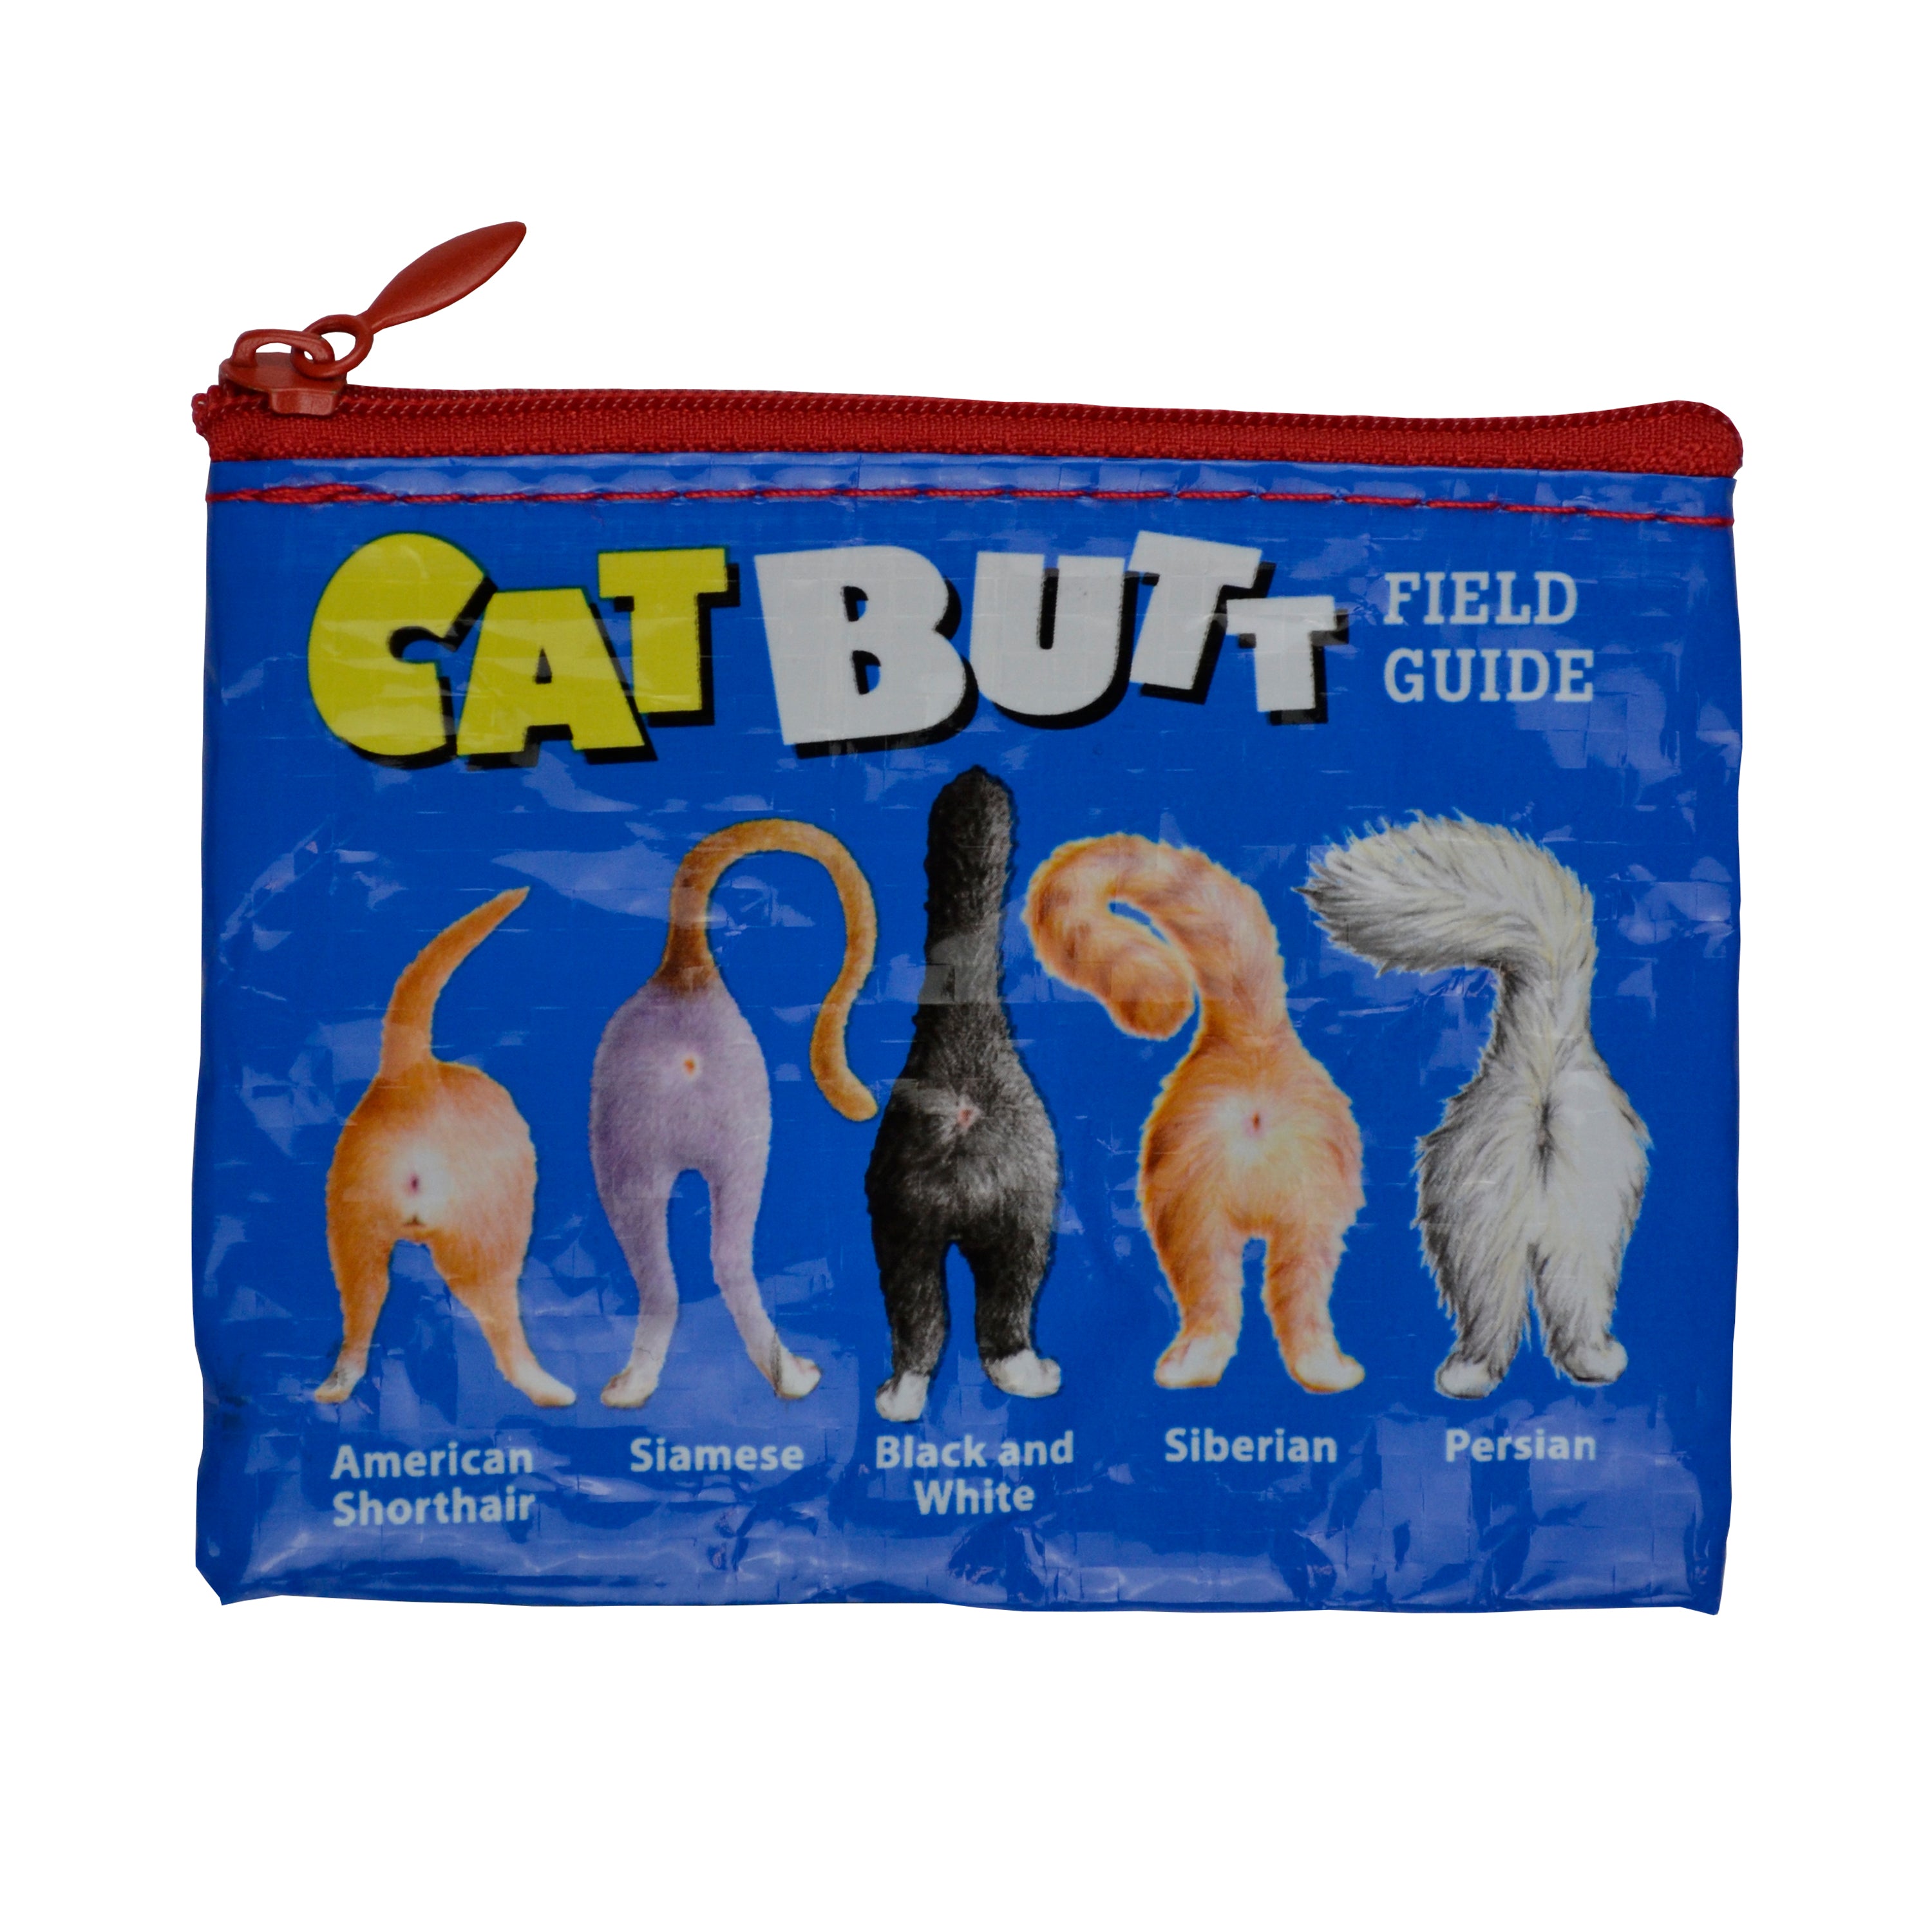 A small blue coin purse with a red zipper featuring 5 different cat butts. The text along the top reads, 